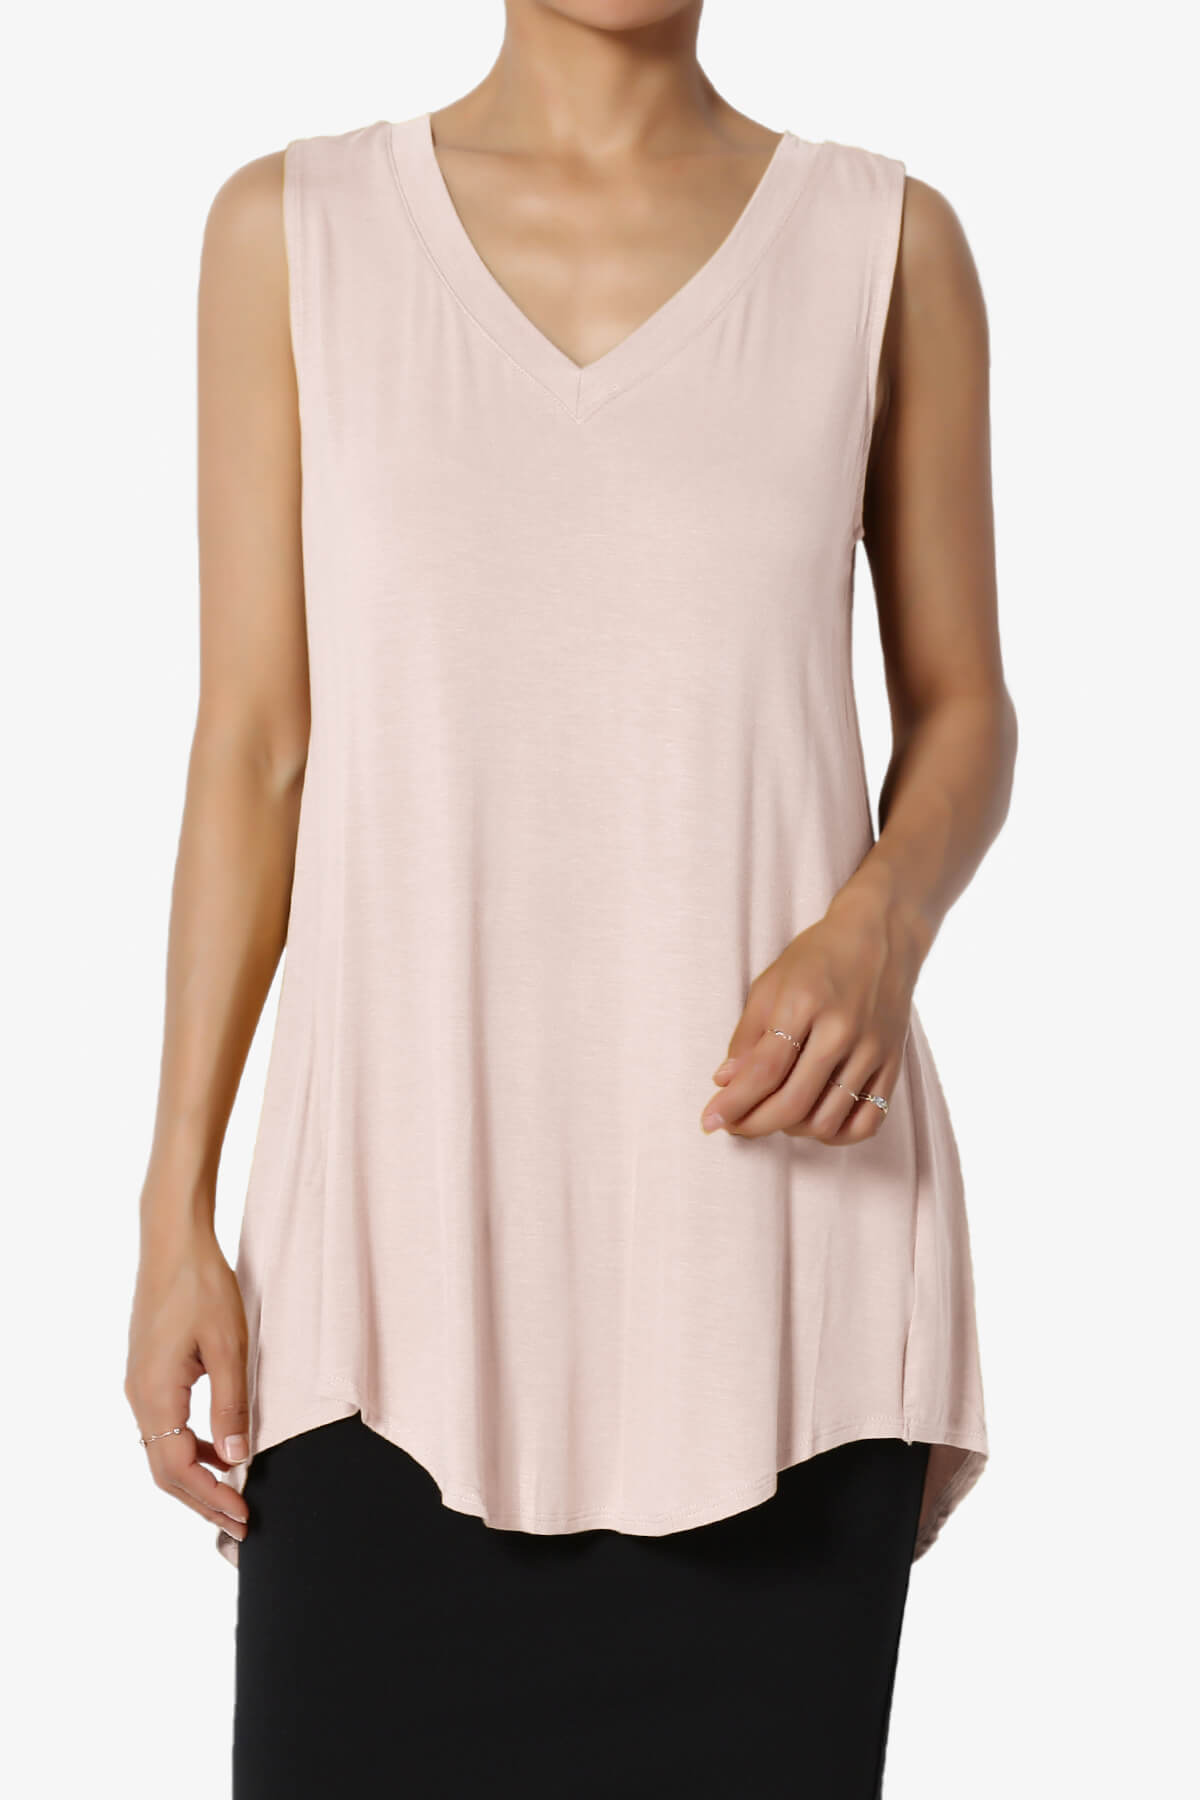 Load image into Gallery viewer, Myles Sleeveless V-Neck Luxe Jersey Top DUSTY BLUSH_1
